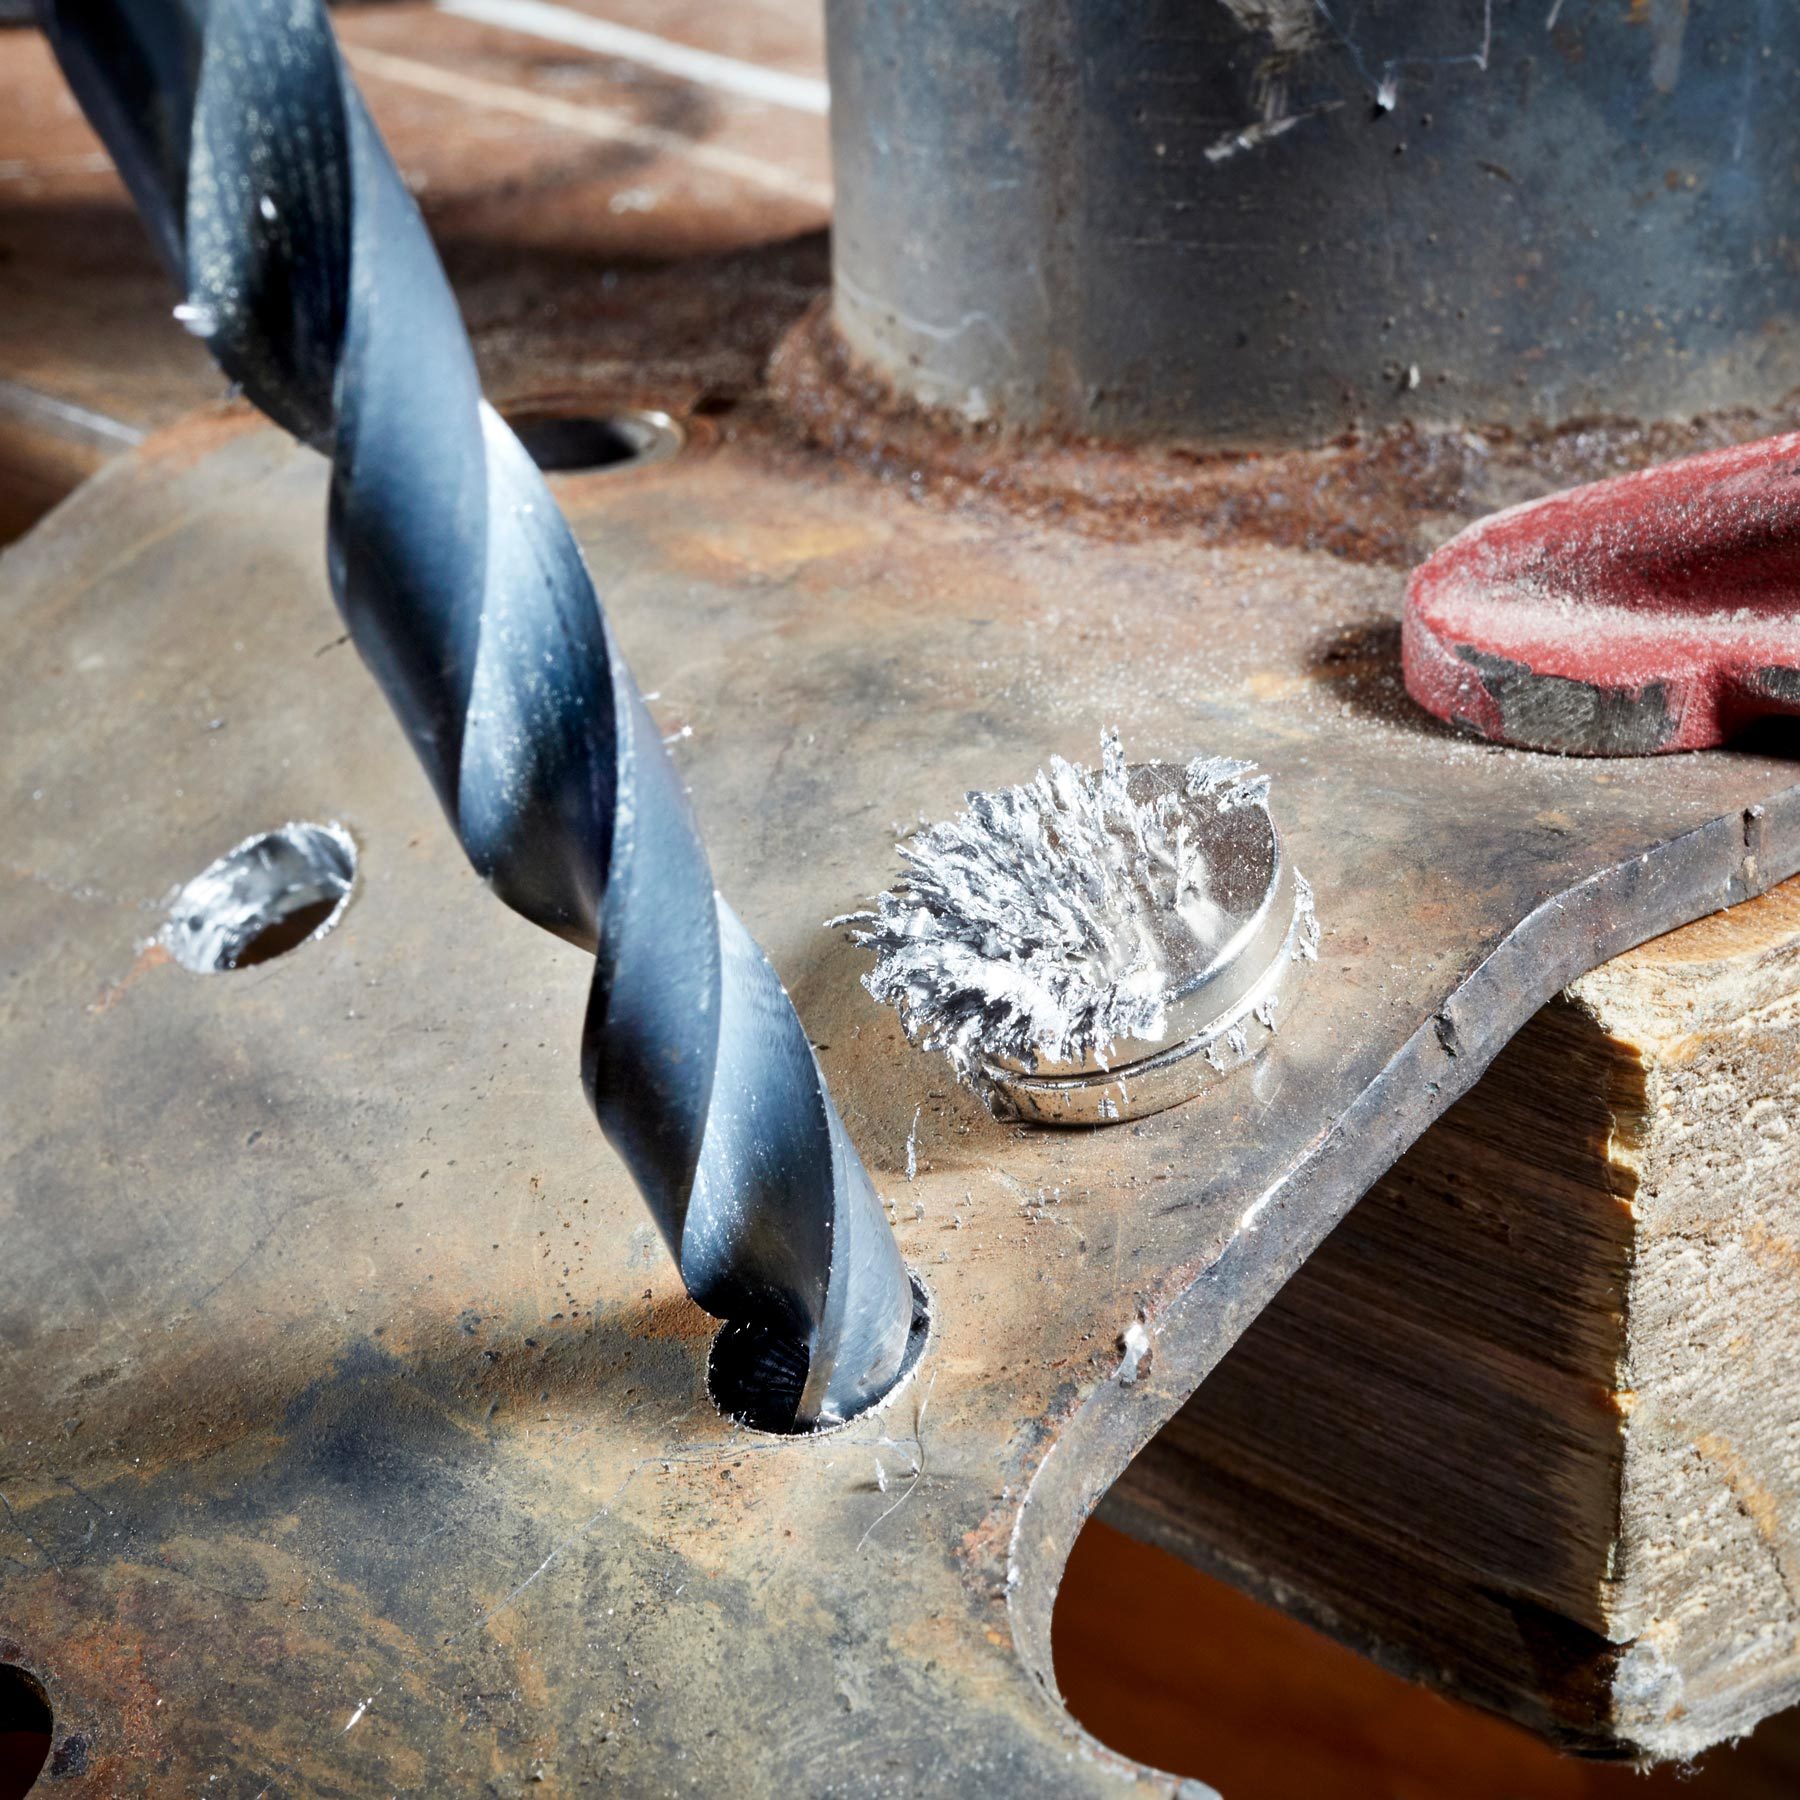 a large drill bit drilling a hole in metal with a magnet next to it to catch the shavings